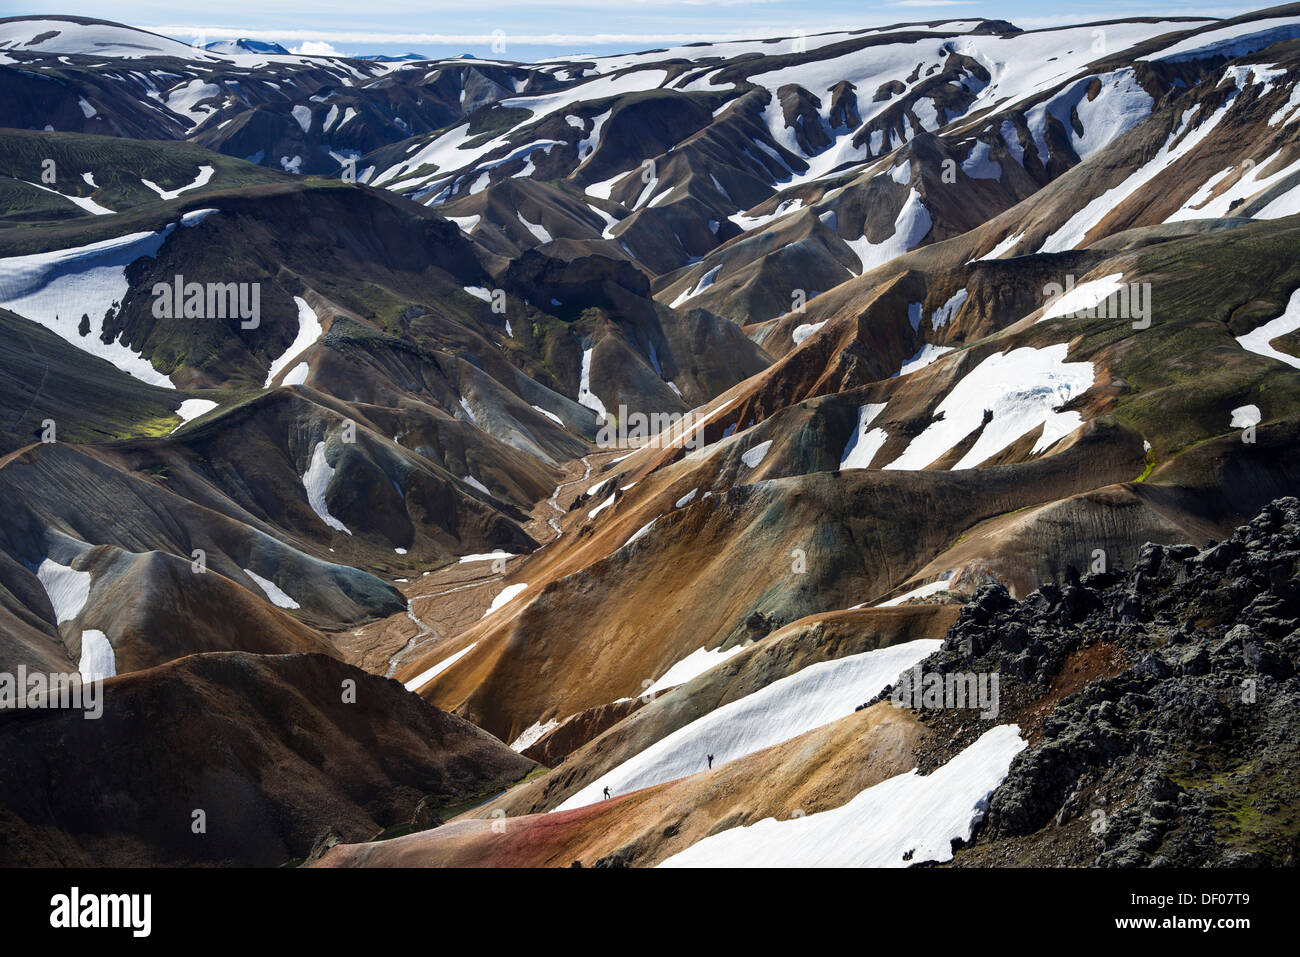 Hikers on a trail, view from the Brennisteinsalda volcano to the snow-capped rhyolite mountains, Landmannalaugar Stock Photo